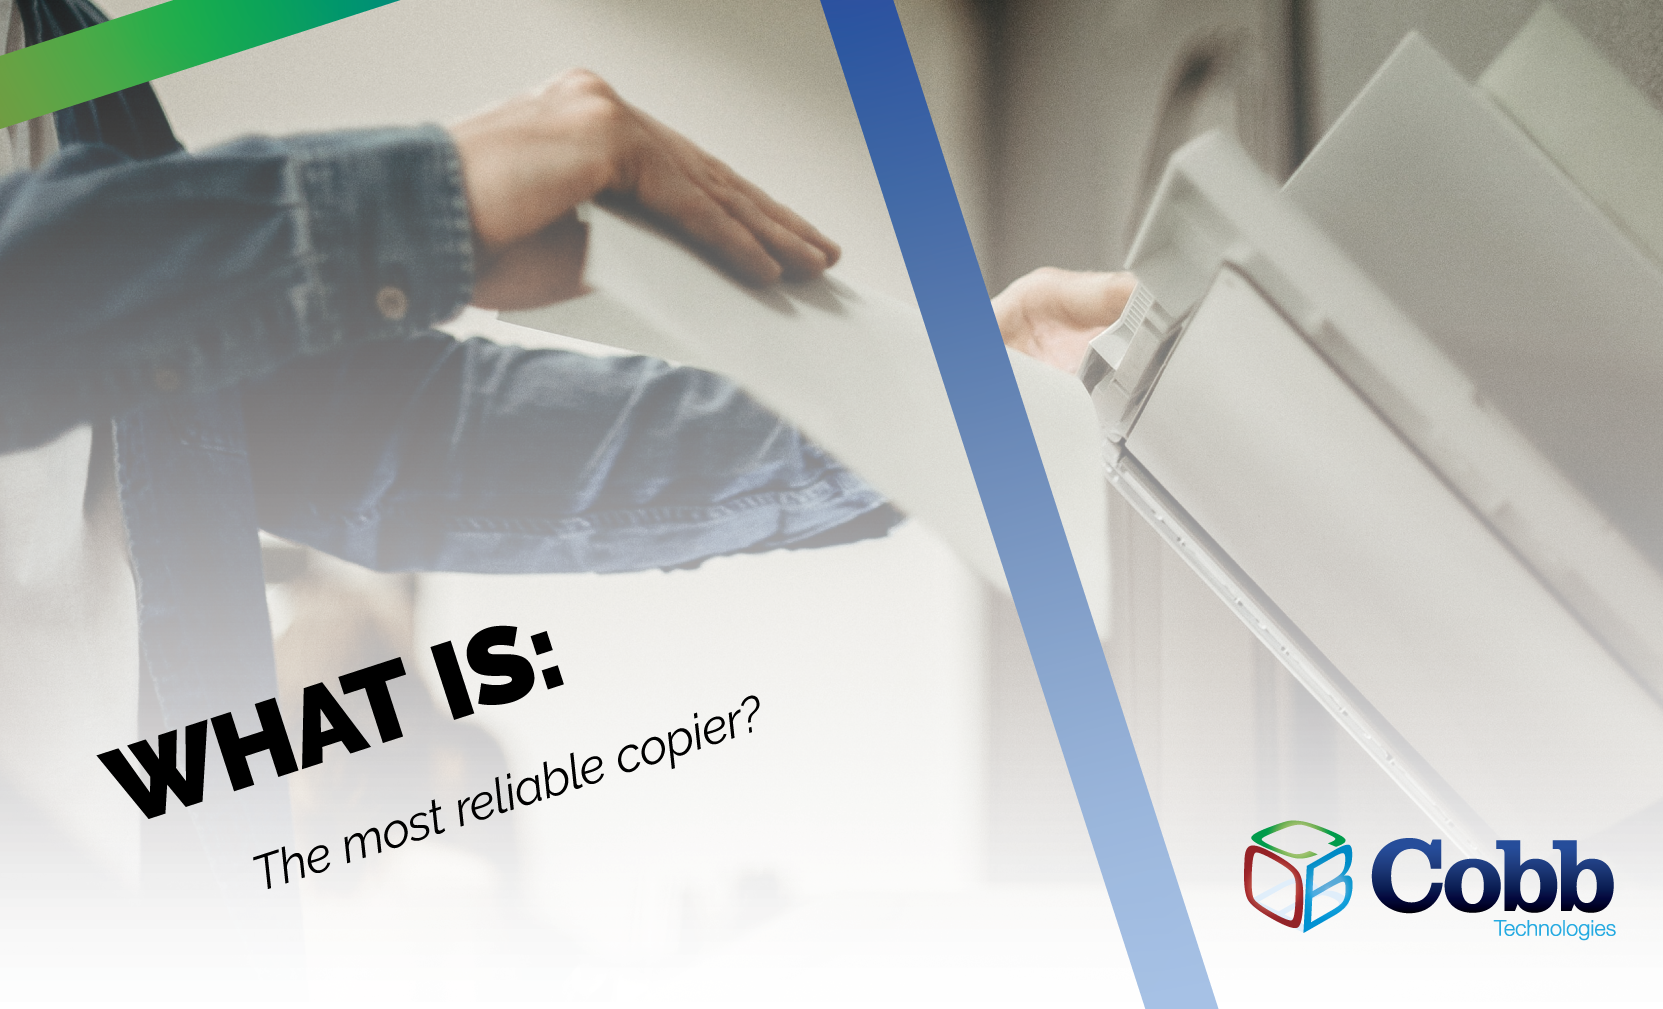 What's the Most Reliable Copier?